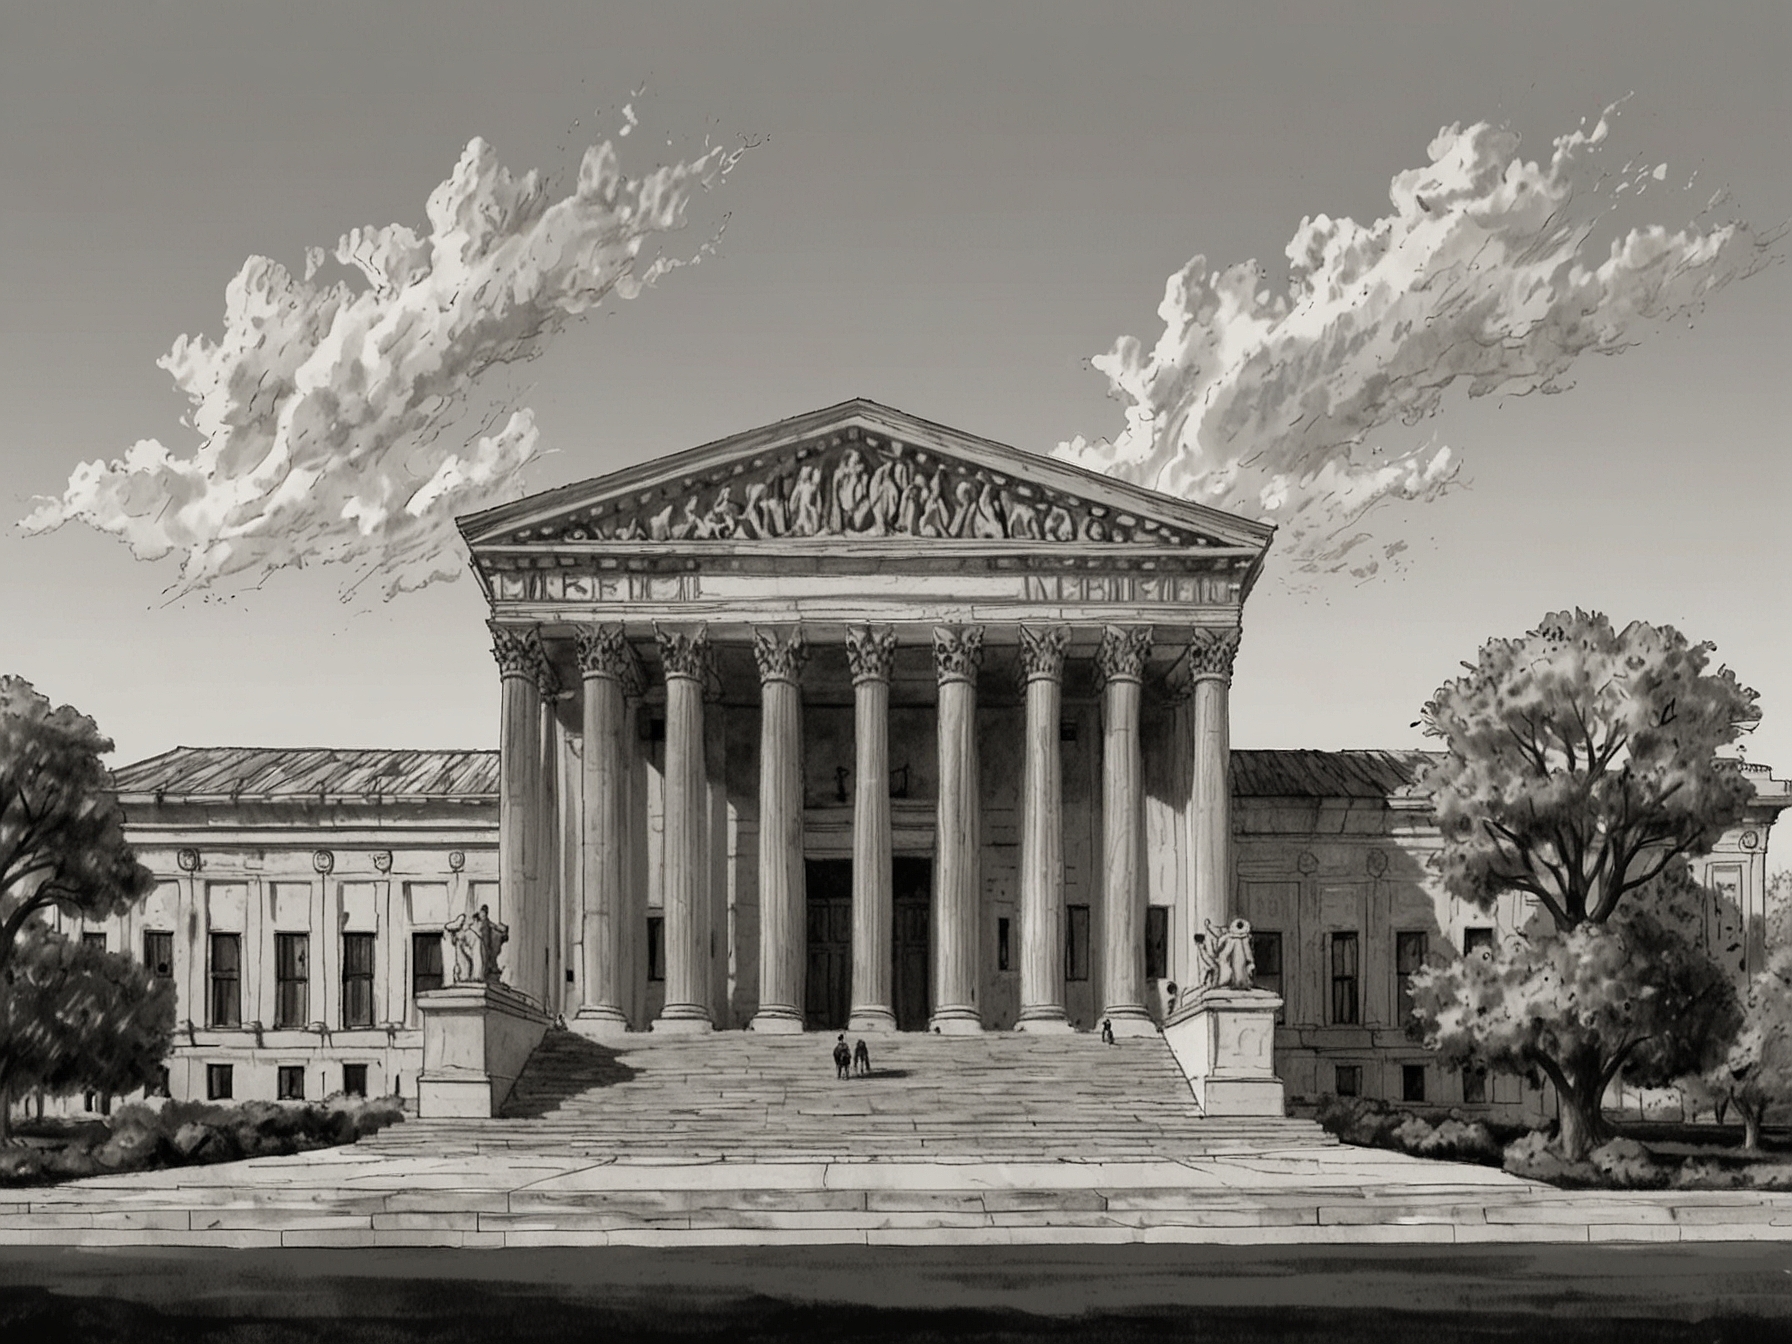 An illustration of the Supreme Court building, symbolizing judicial decisions and their impact on reproductive rights in the United States.